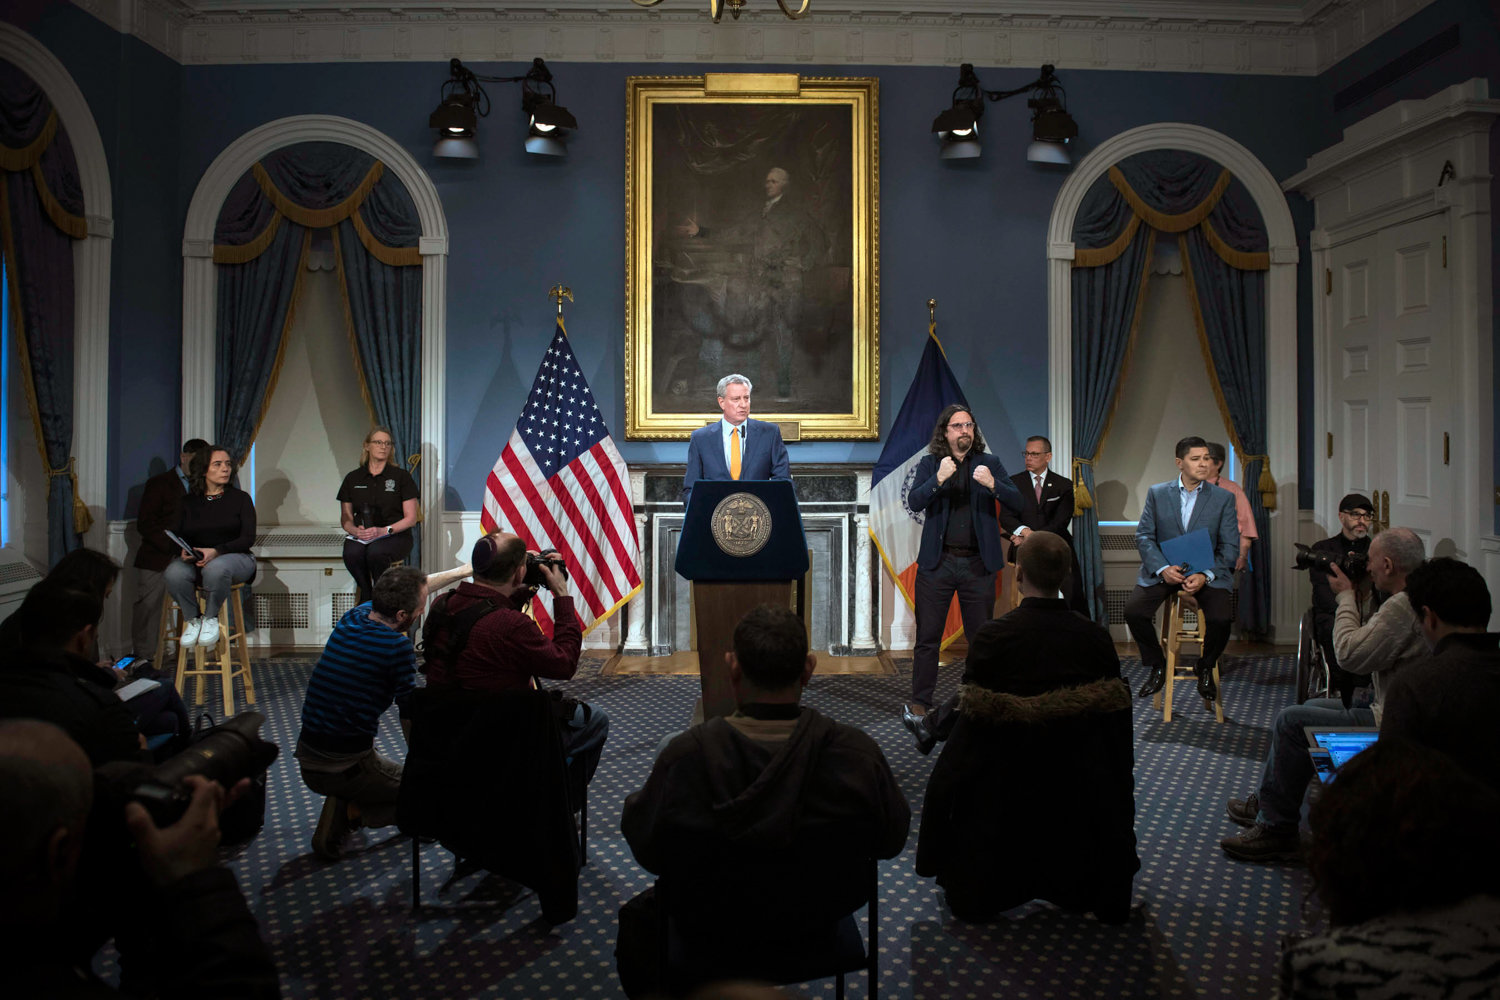 Mayor Bill de Blasio talks about measures the city is taking — including closing public schools until at least April 20 — at a March 15 news conference.